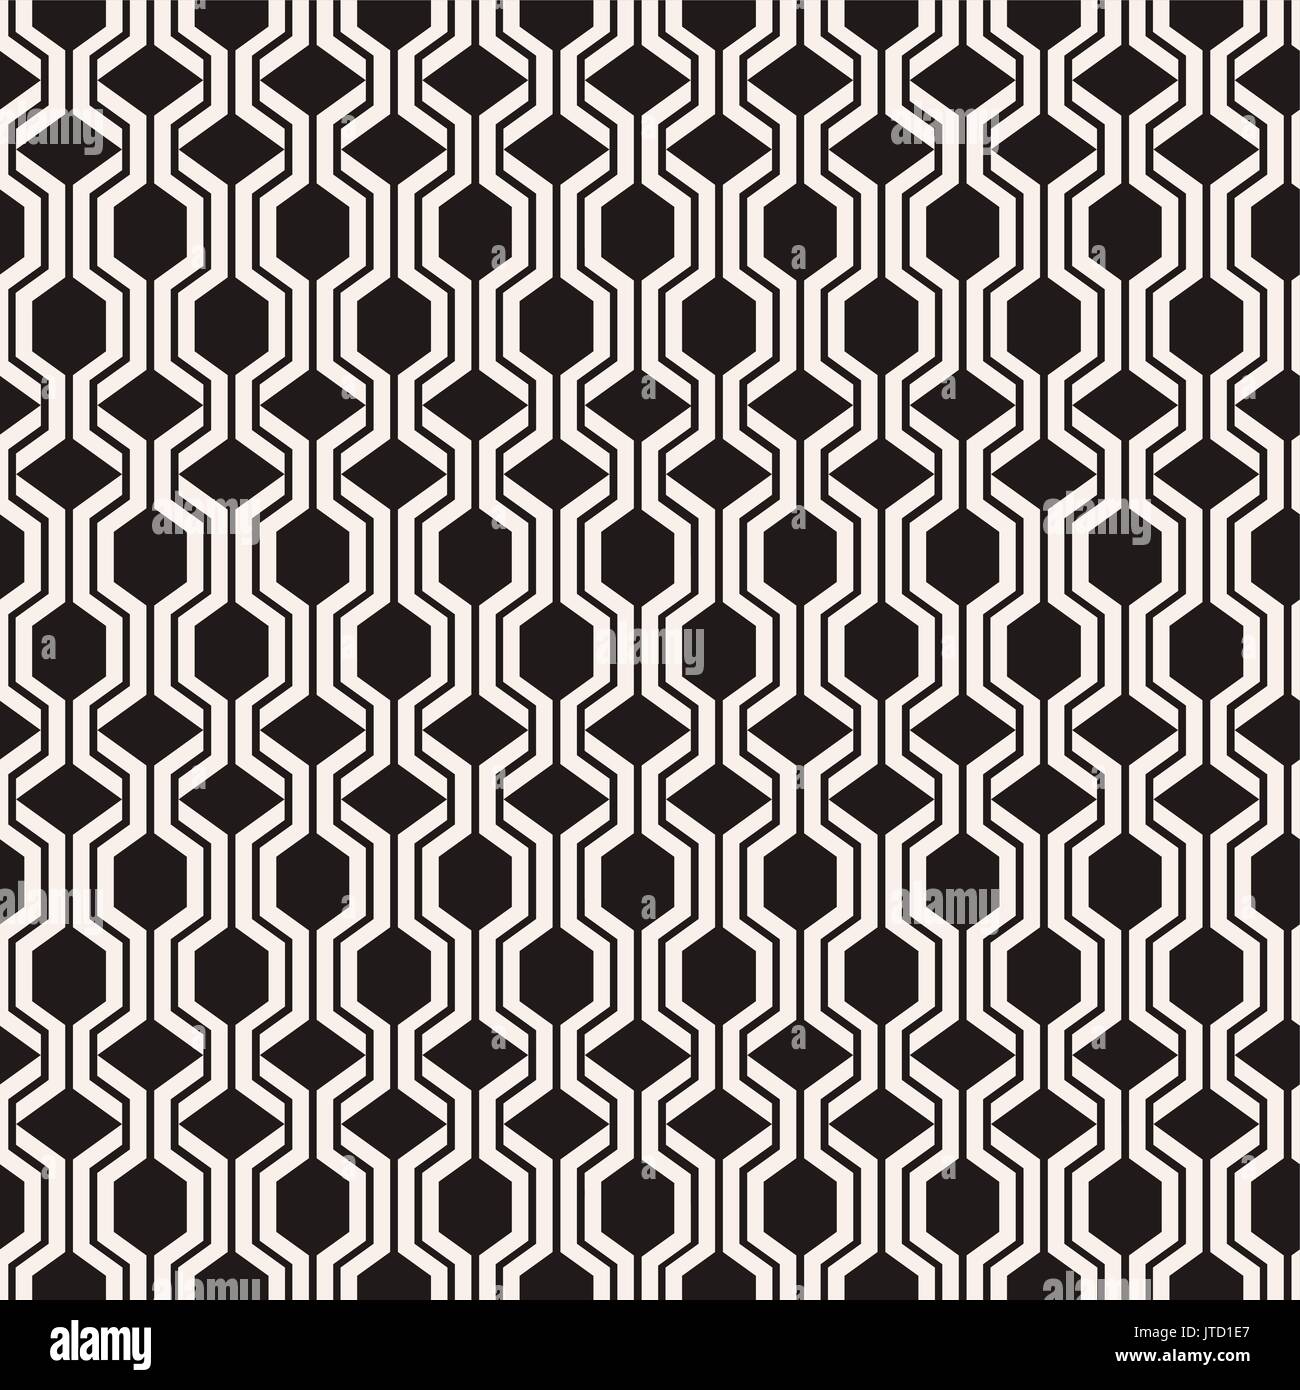 Abstract vector seamless pattern with hexagons and rhombuses. Geometric  black and white endless texture can be used for textile, gift wrap,fabric. Stock Vector